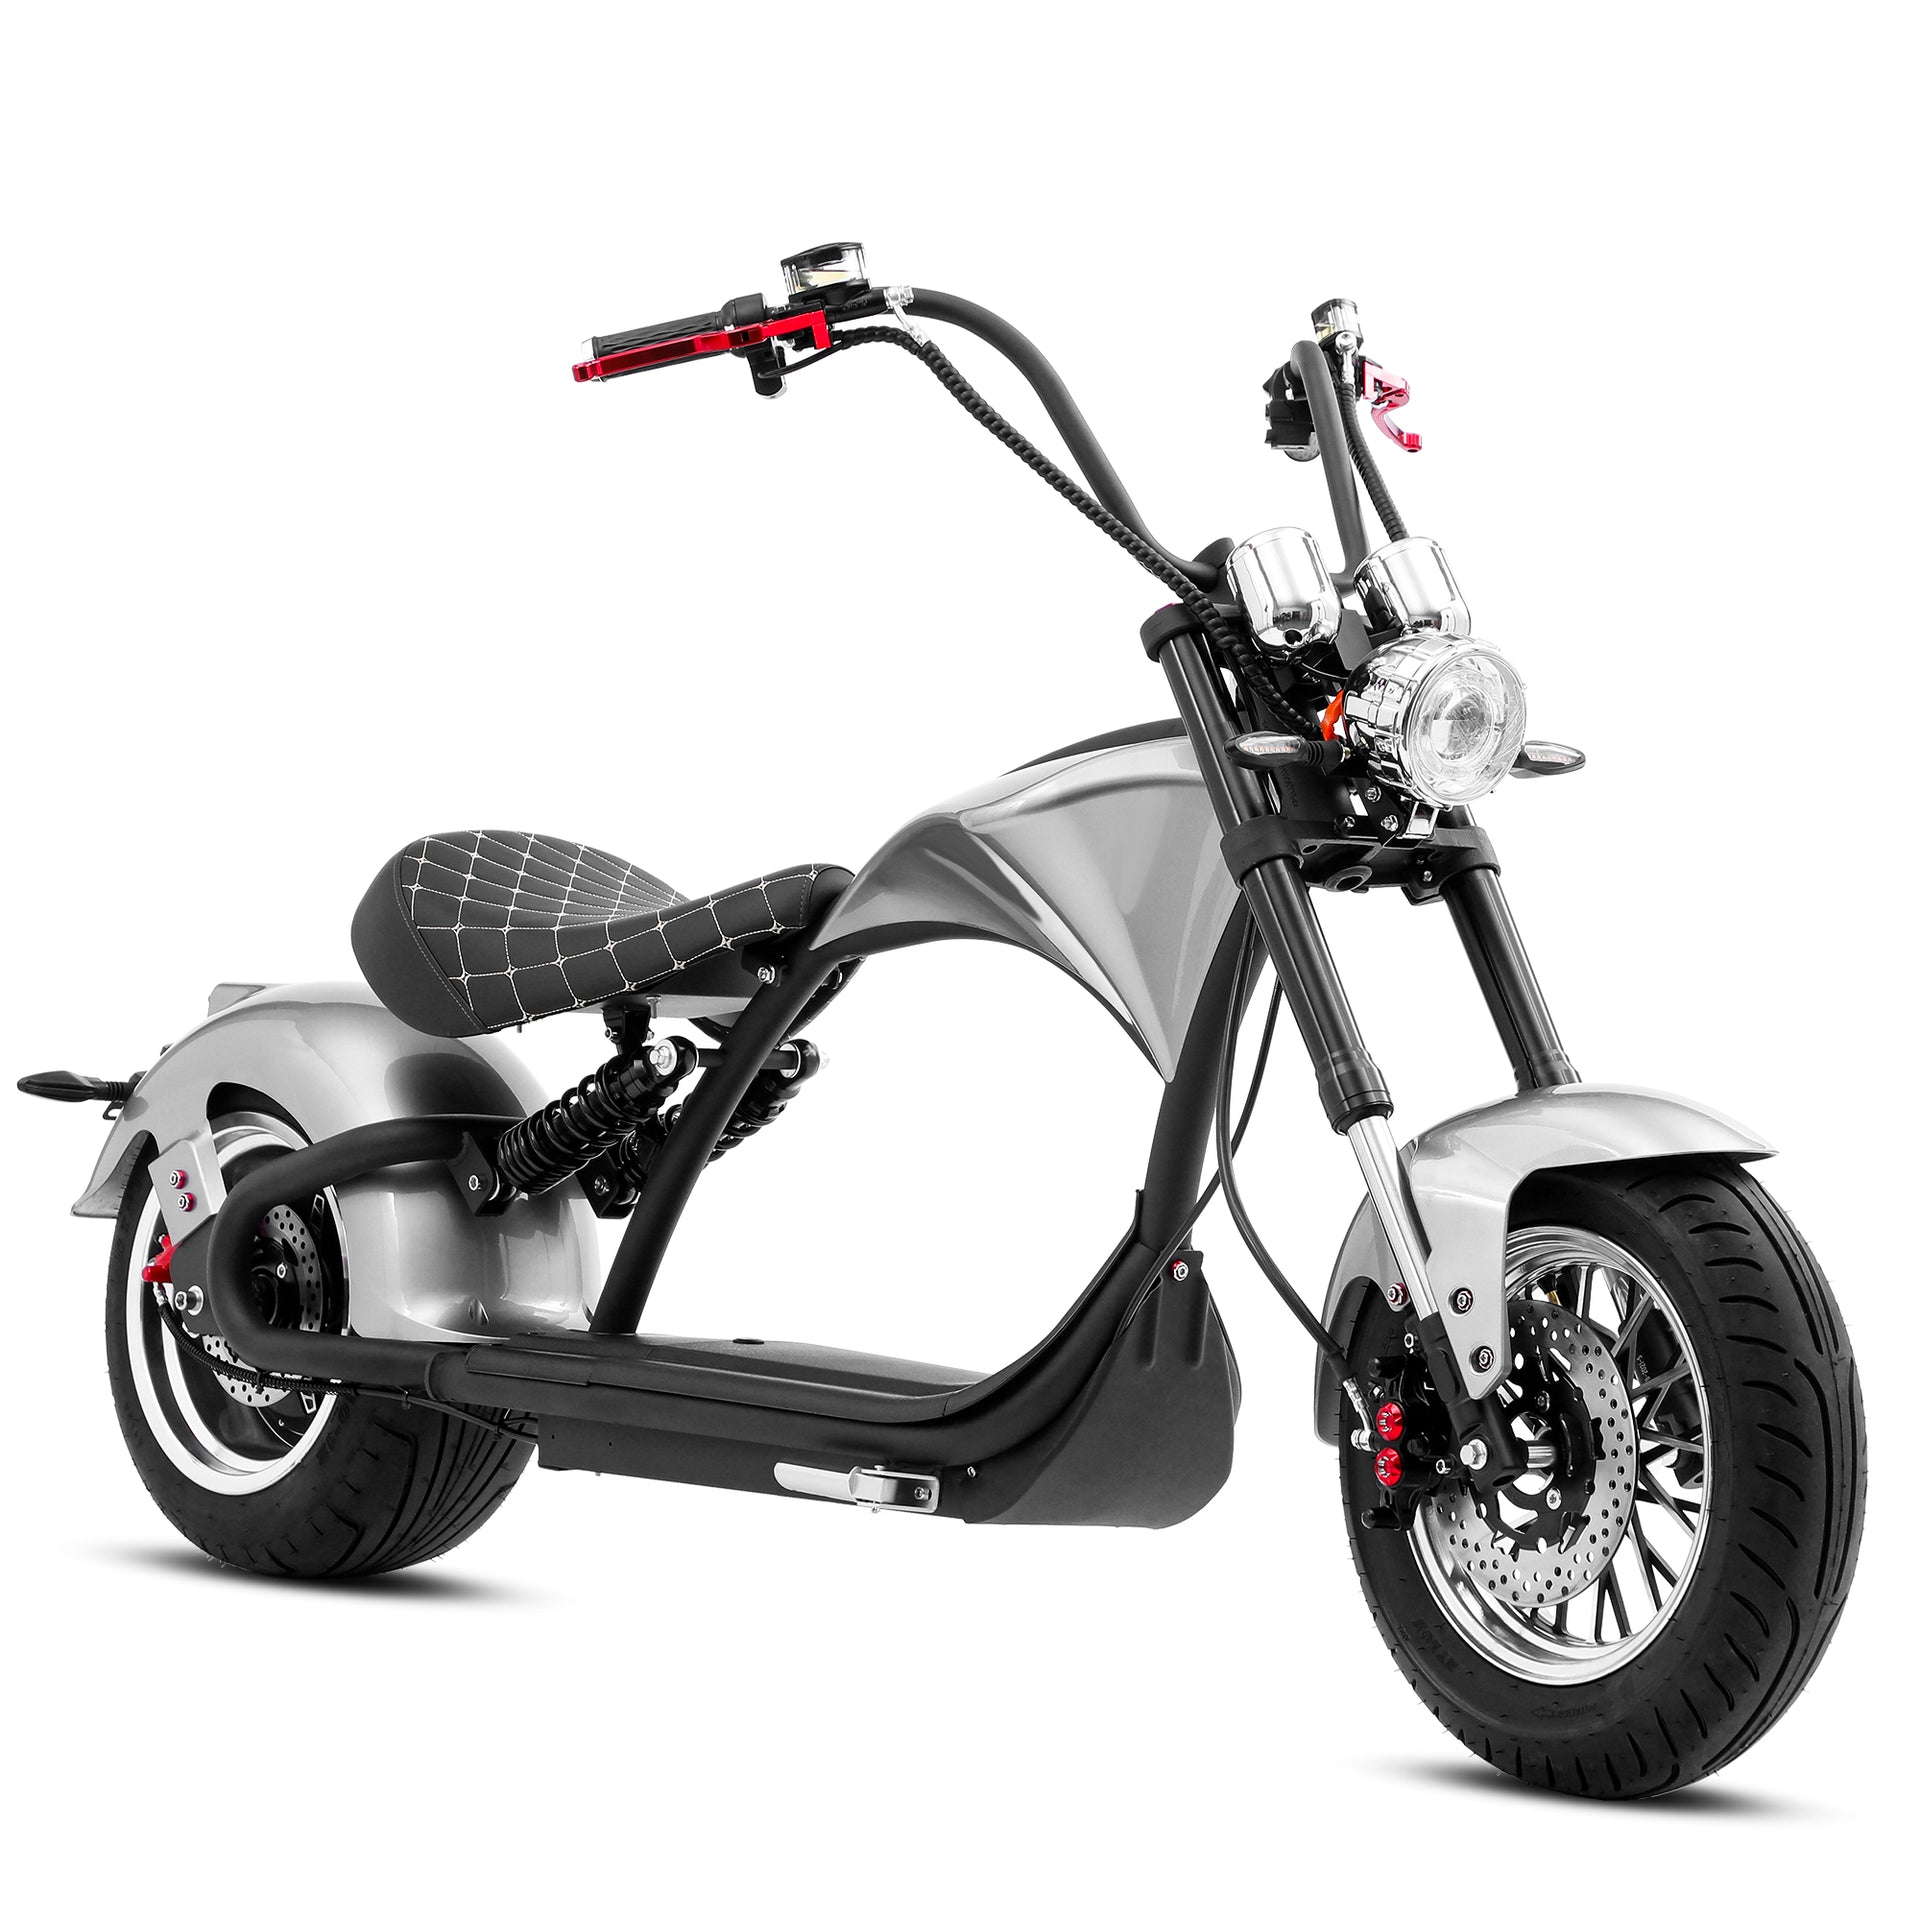 2000W Legal Electric Motorcycle - Eahora M1P